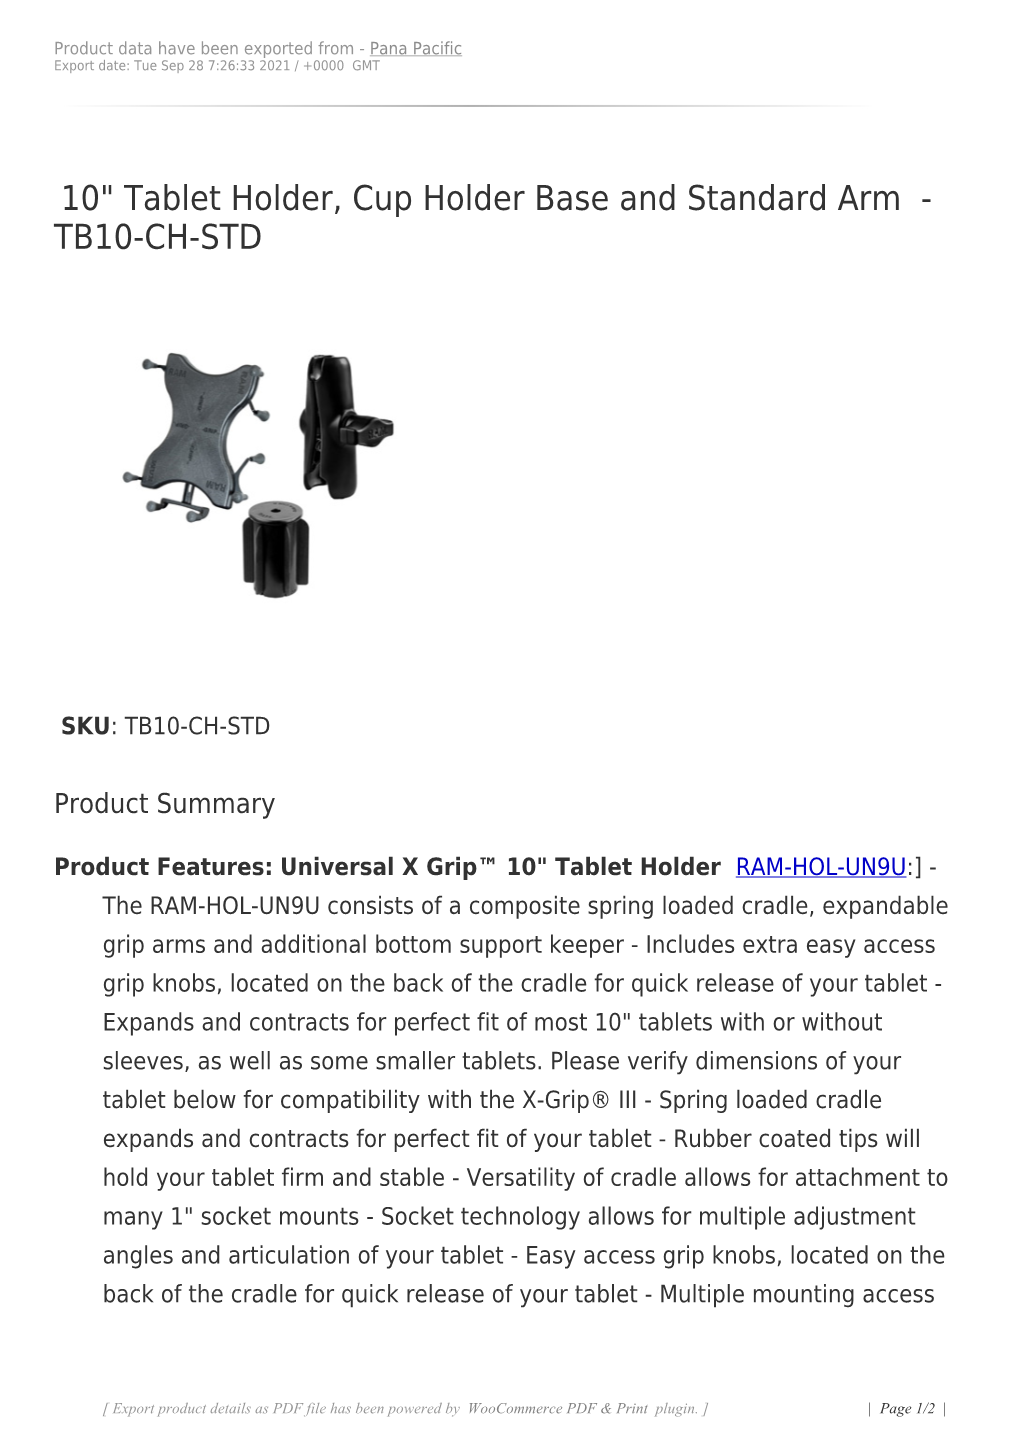 10" Tablet Holder, Cup Holder Base and Standard Arm - TB10-CH-STD